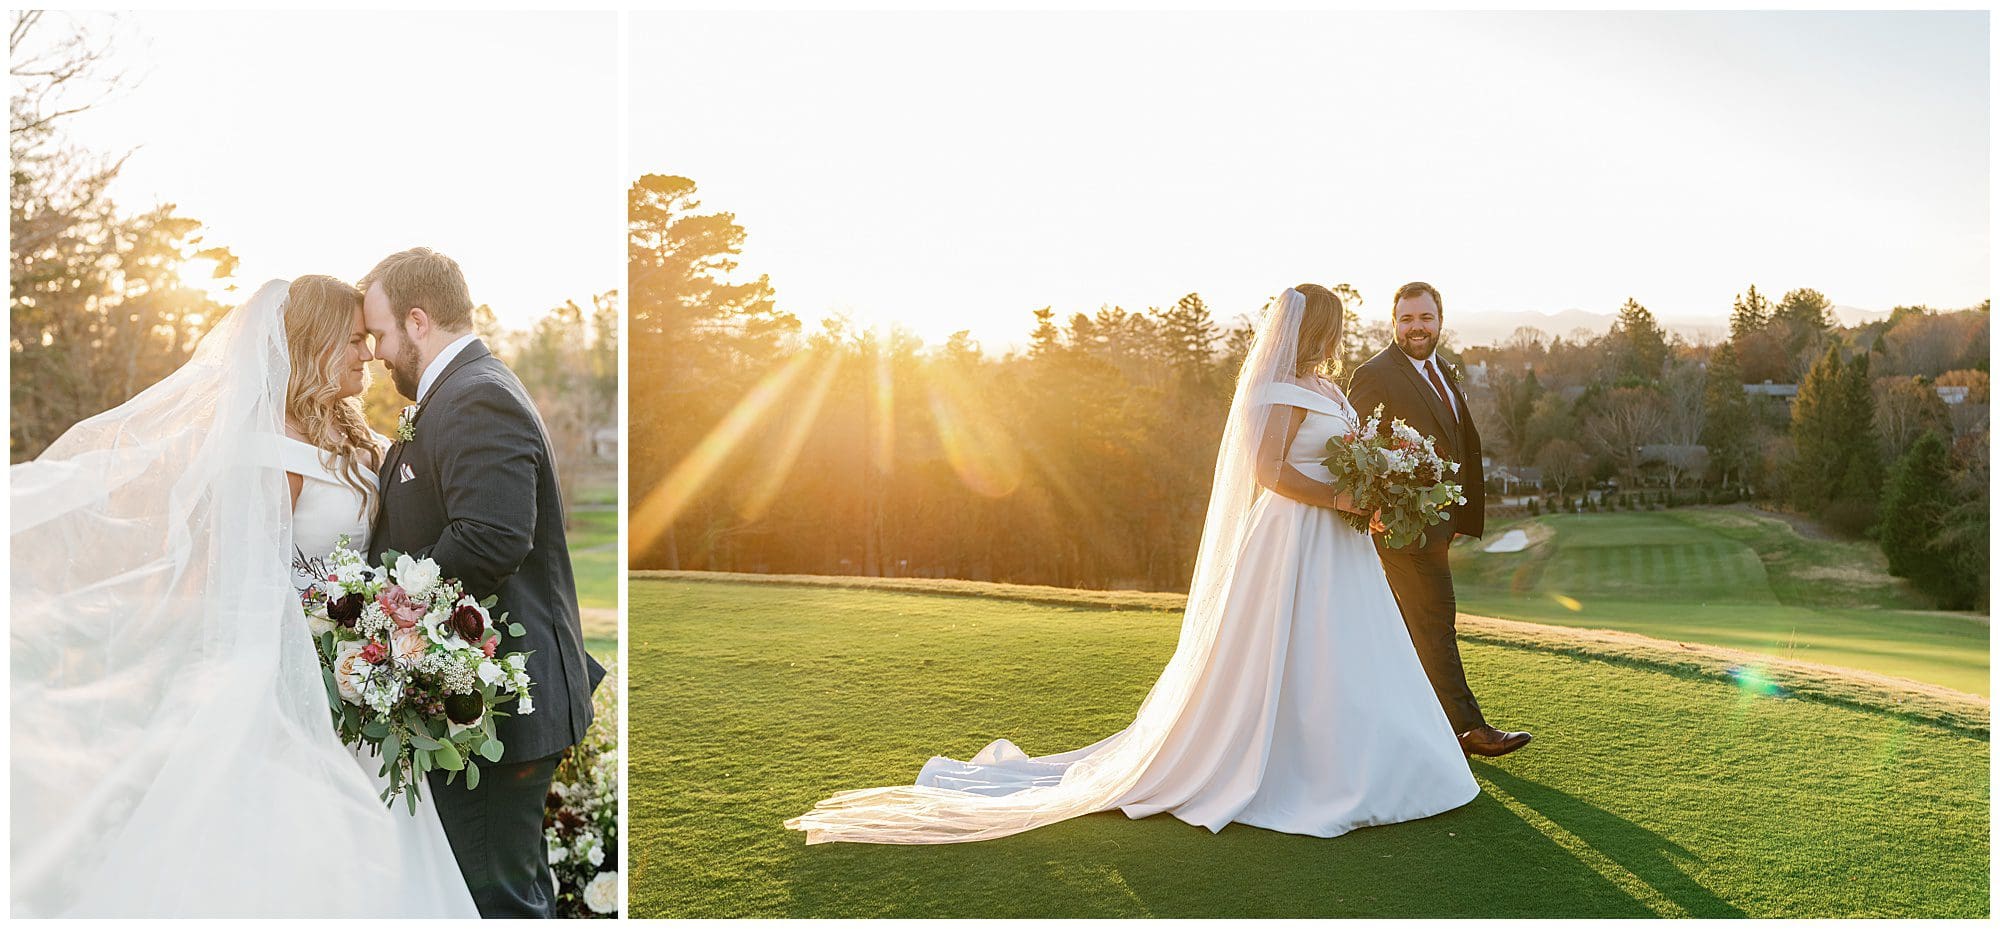 A bride and groom standing on a golf course at sunset.